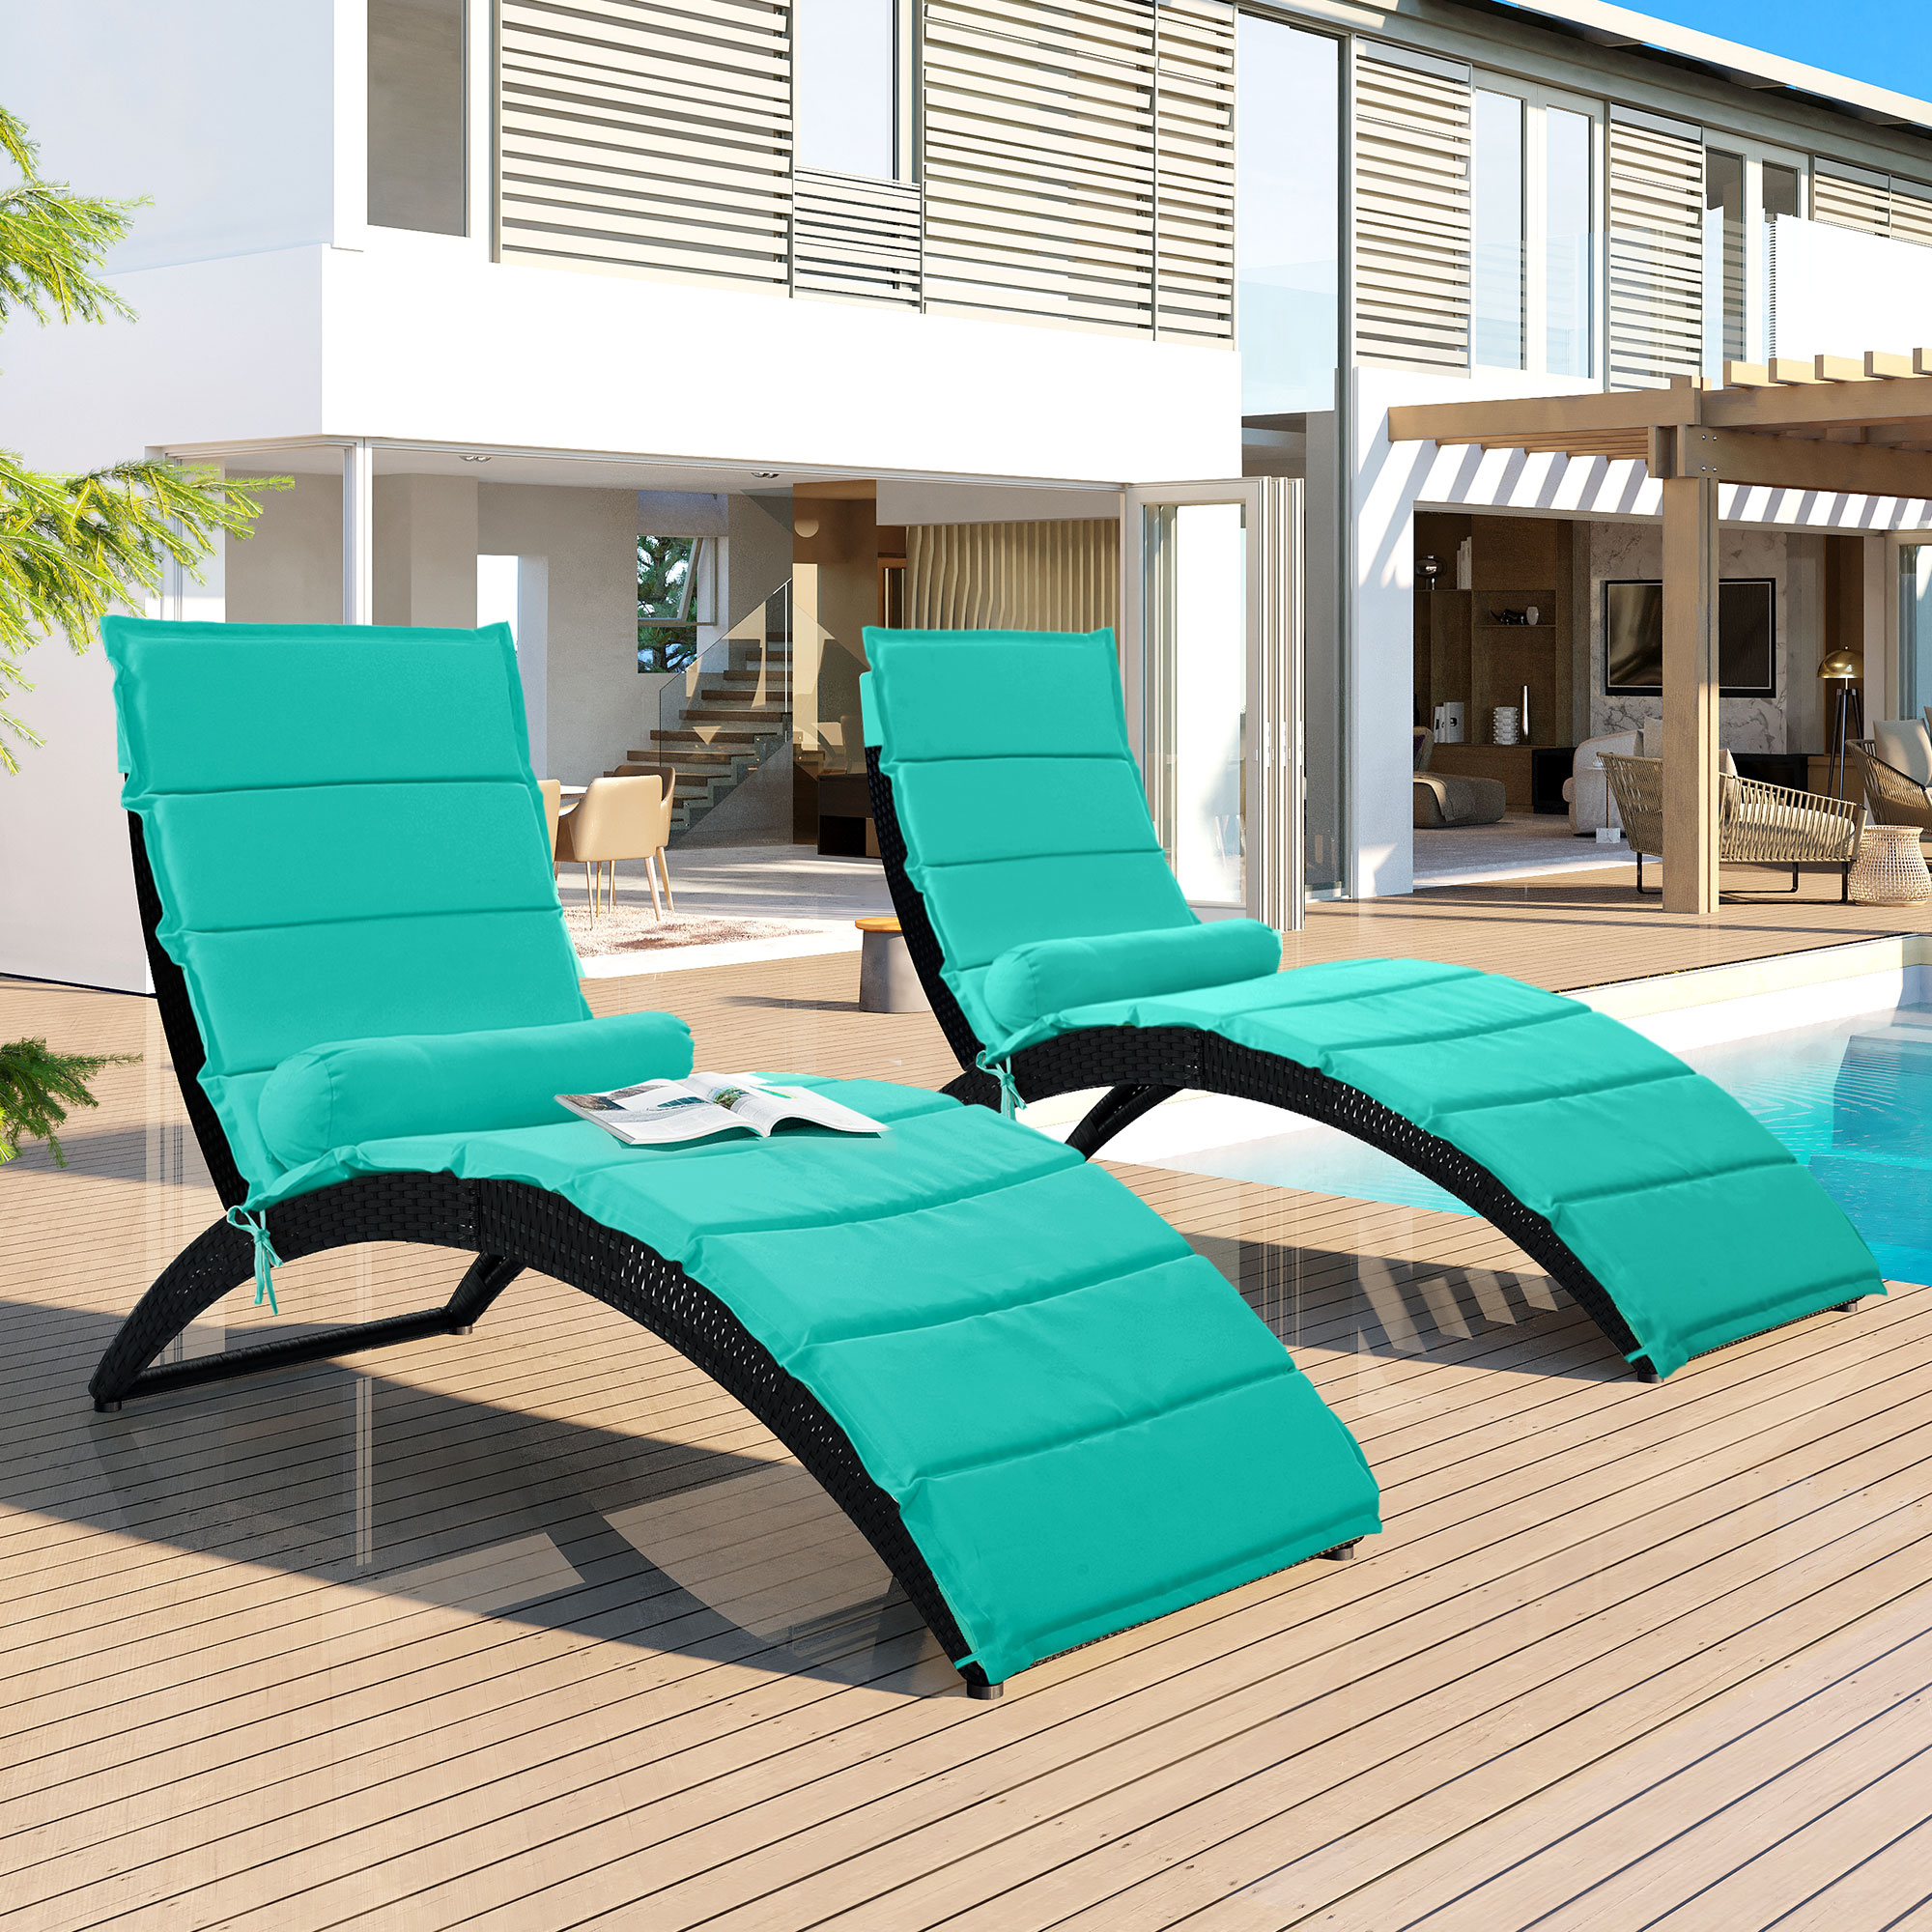 Patio Chaise Lounge Chairs Set of 2, PE Wicker Adjustable Reclining Chairs, Outdoor Rattan Chaise Chairs, Cushioned Sun Lounger for Outside, Poolside, Garden, Backyard, Blue, D6390 - image 1 of 10